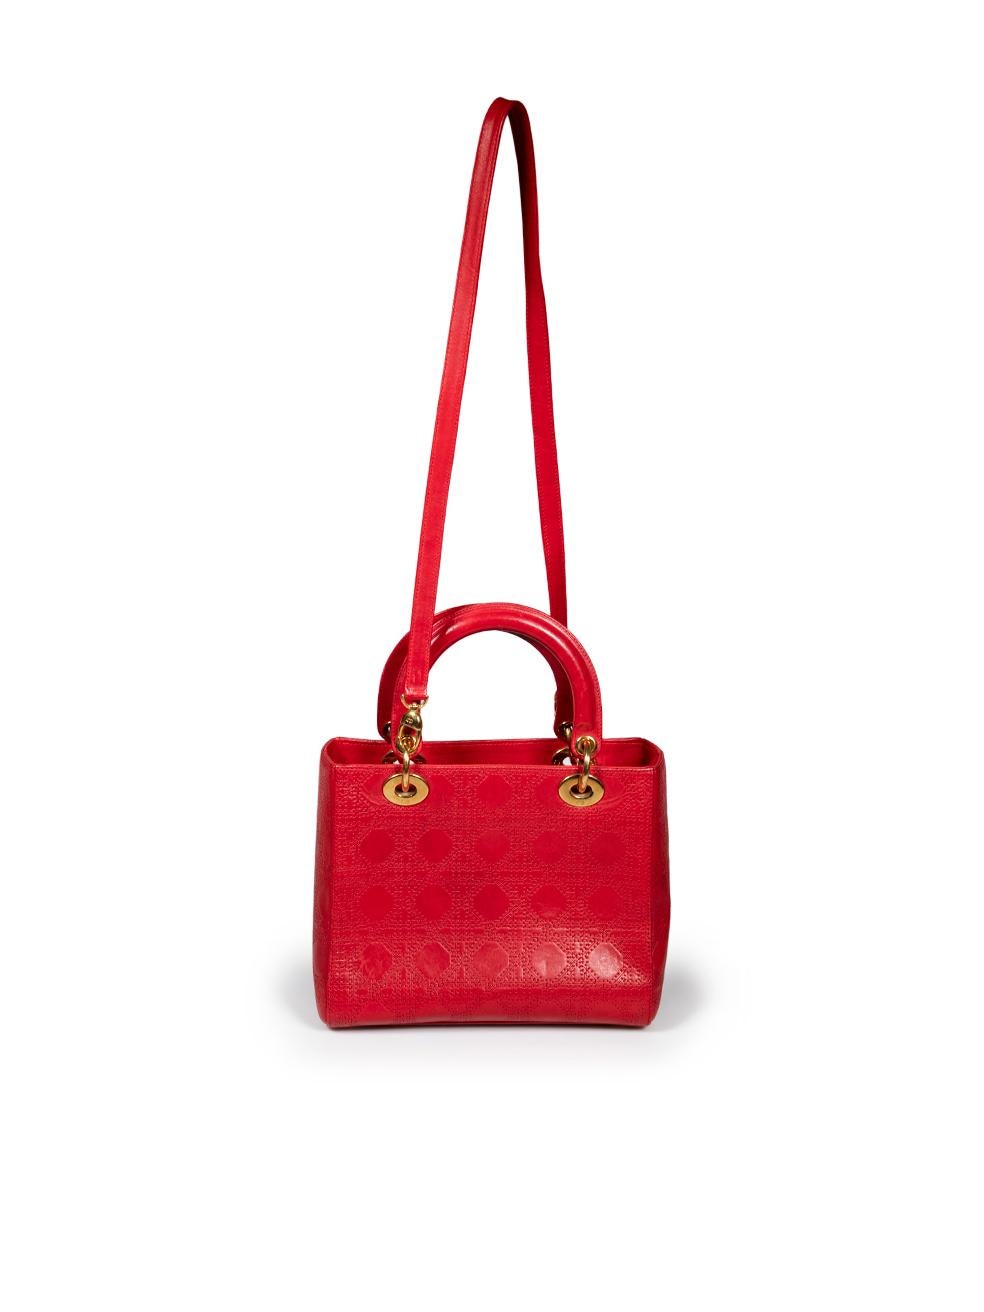 Dior Red Leather Laser Cut Medium Lady Dior Bag In Good Condition For Sale In London, GB